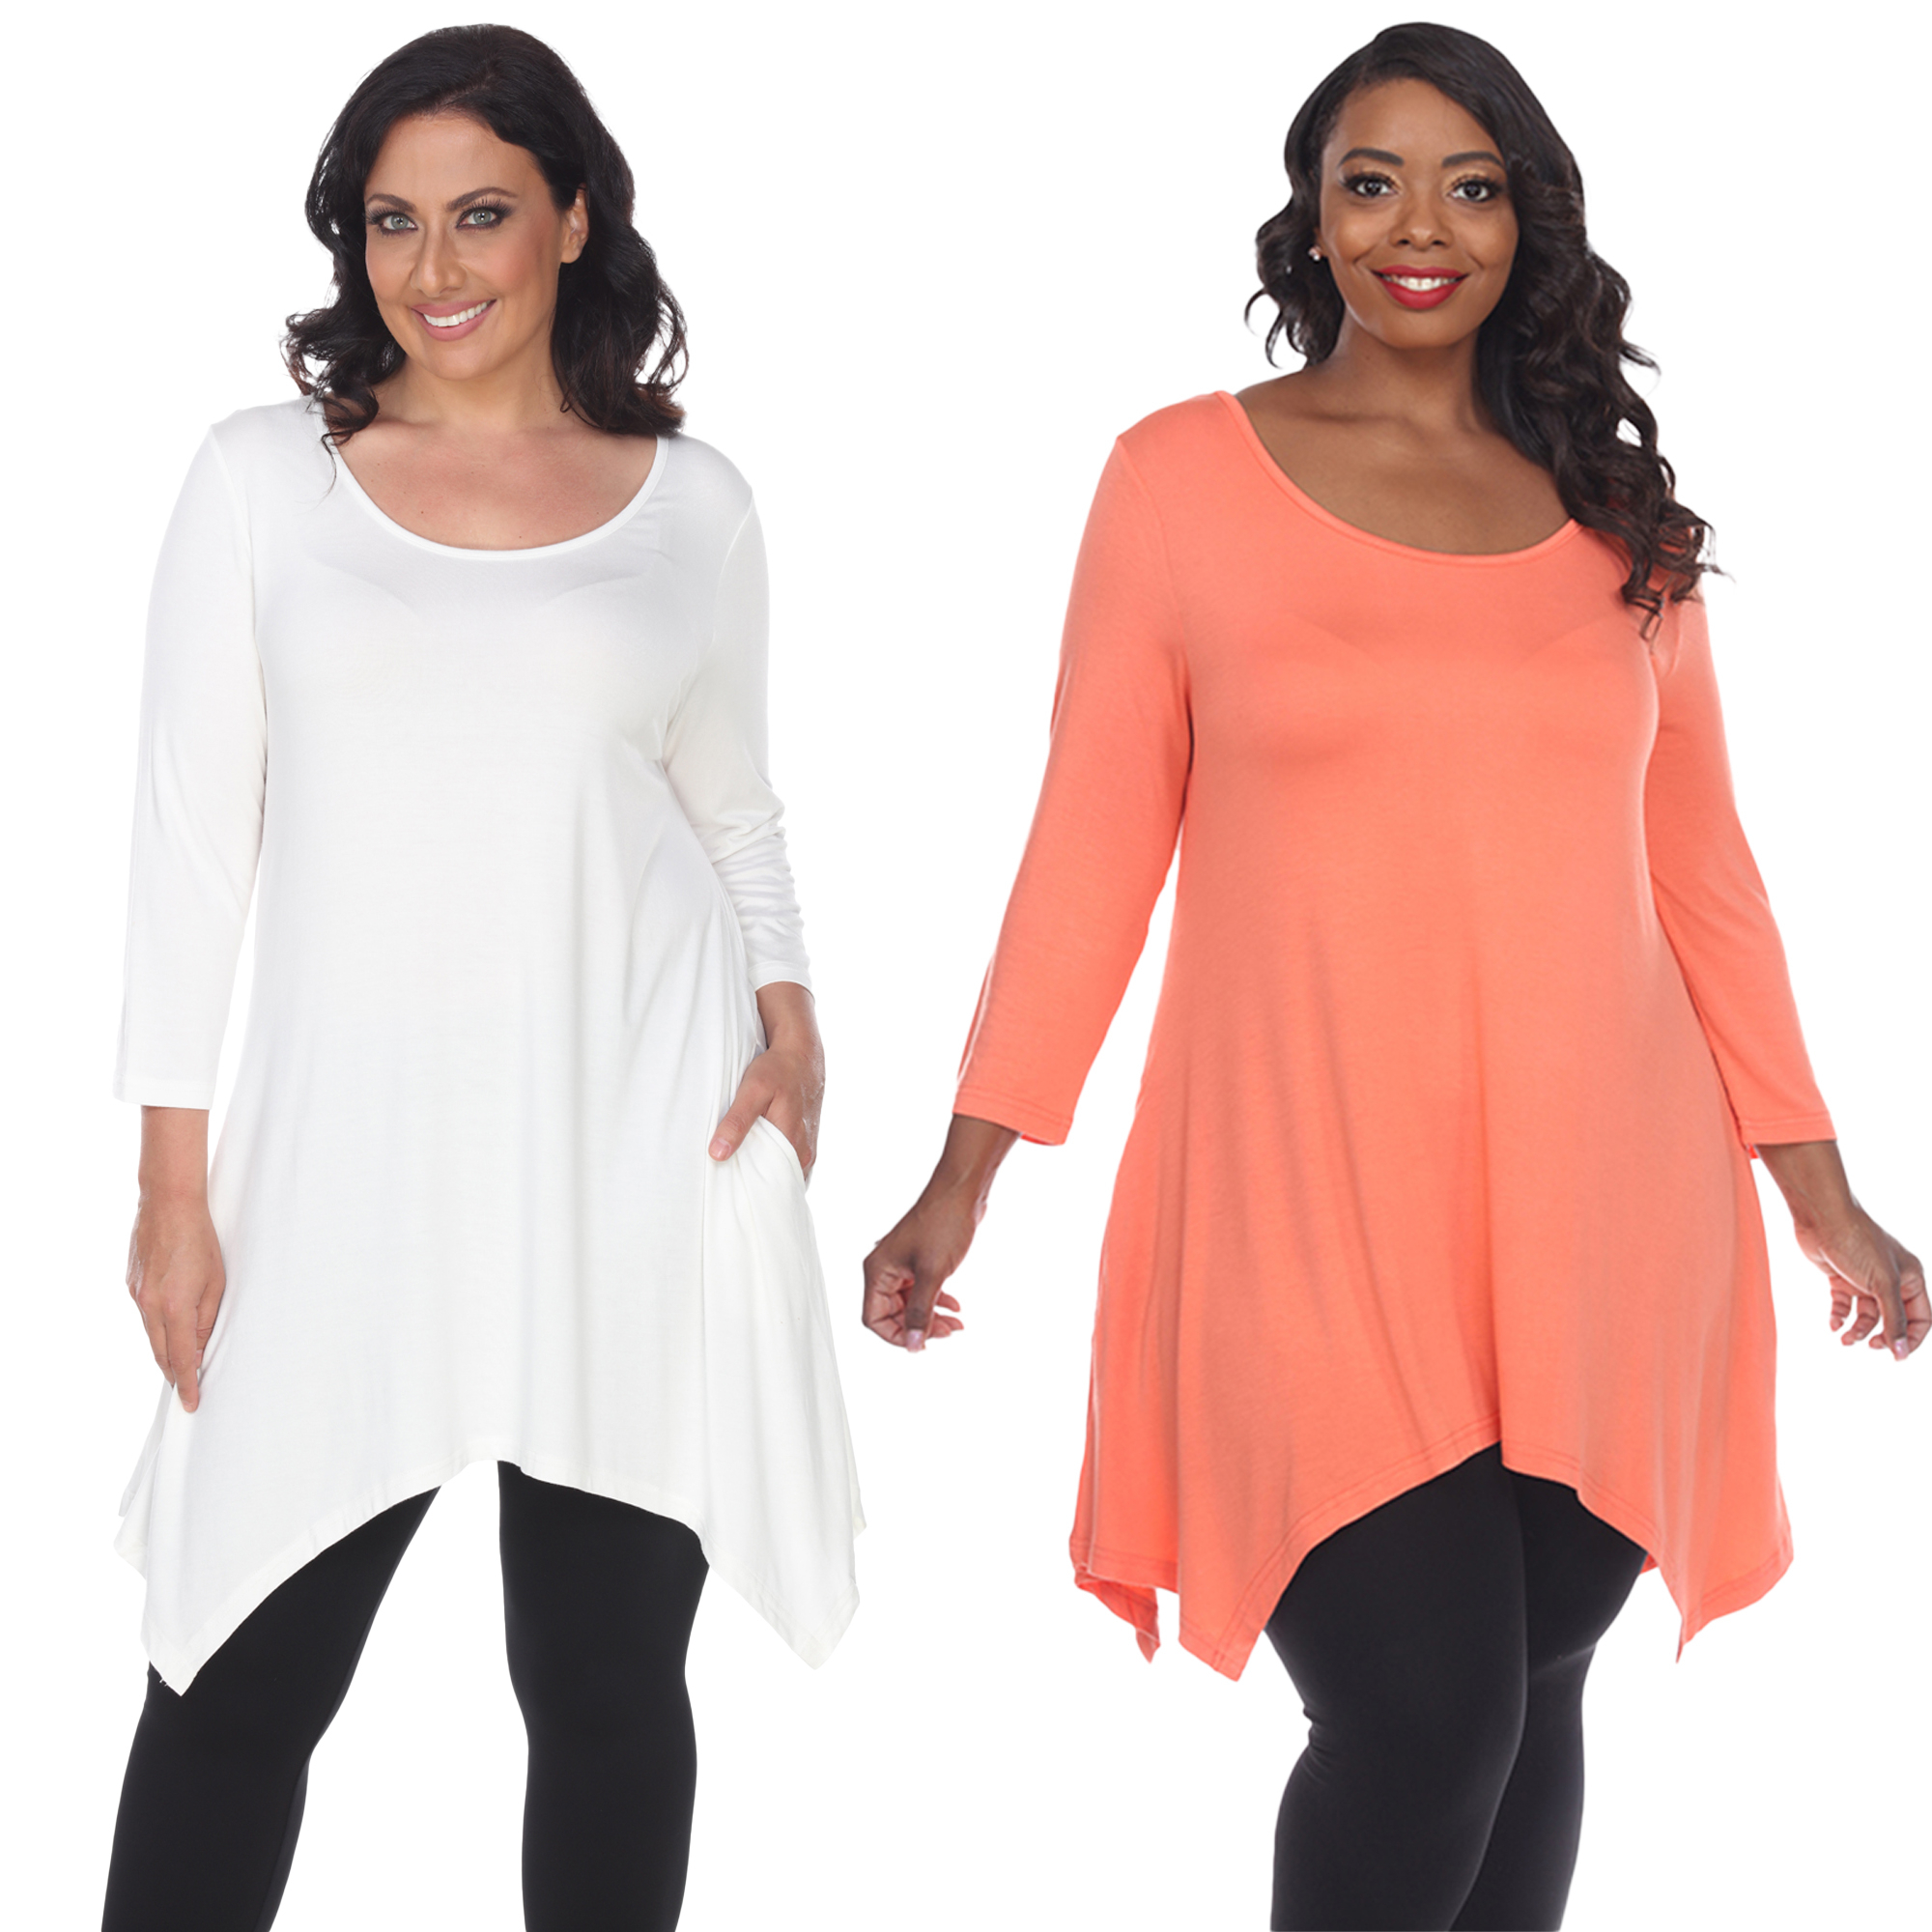 White Mark Women's Pack Of 2 White Tunic Top - White, Coral, 3X